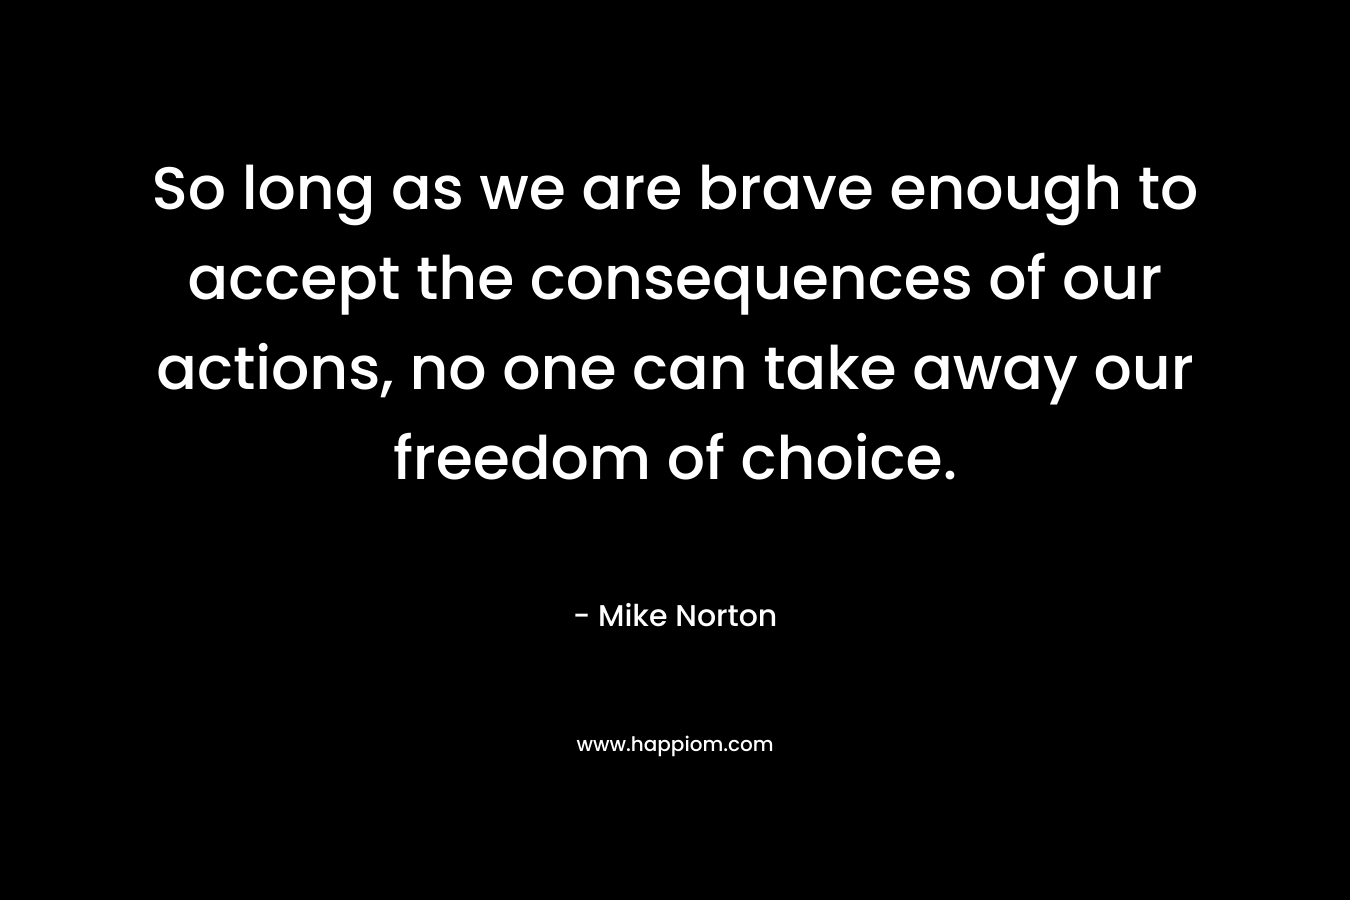 So long as we are brave enough to accept the consequences of our actions, no one can take away our freedom of choice.